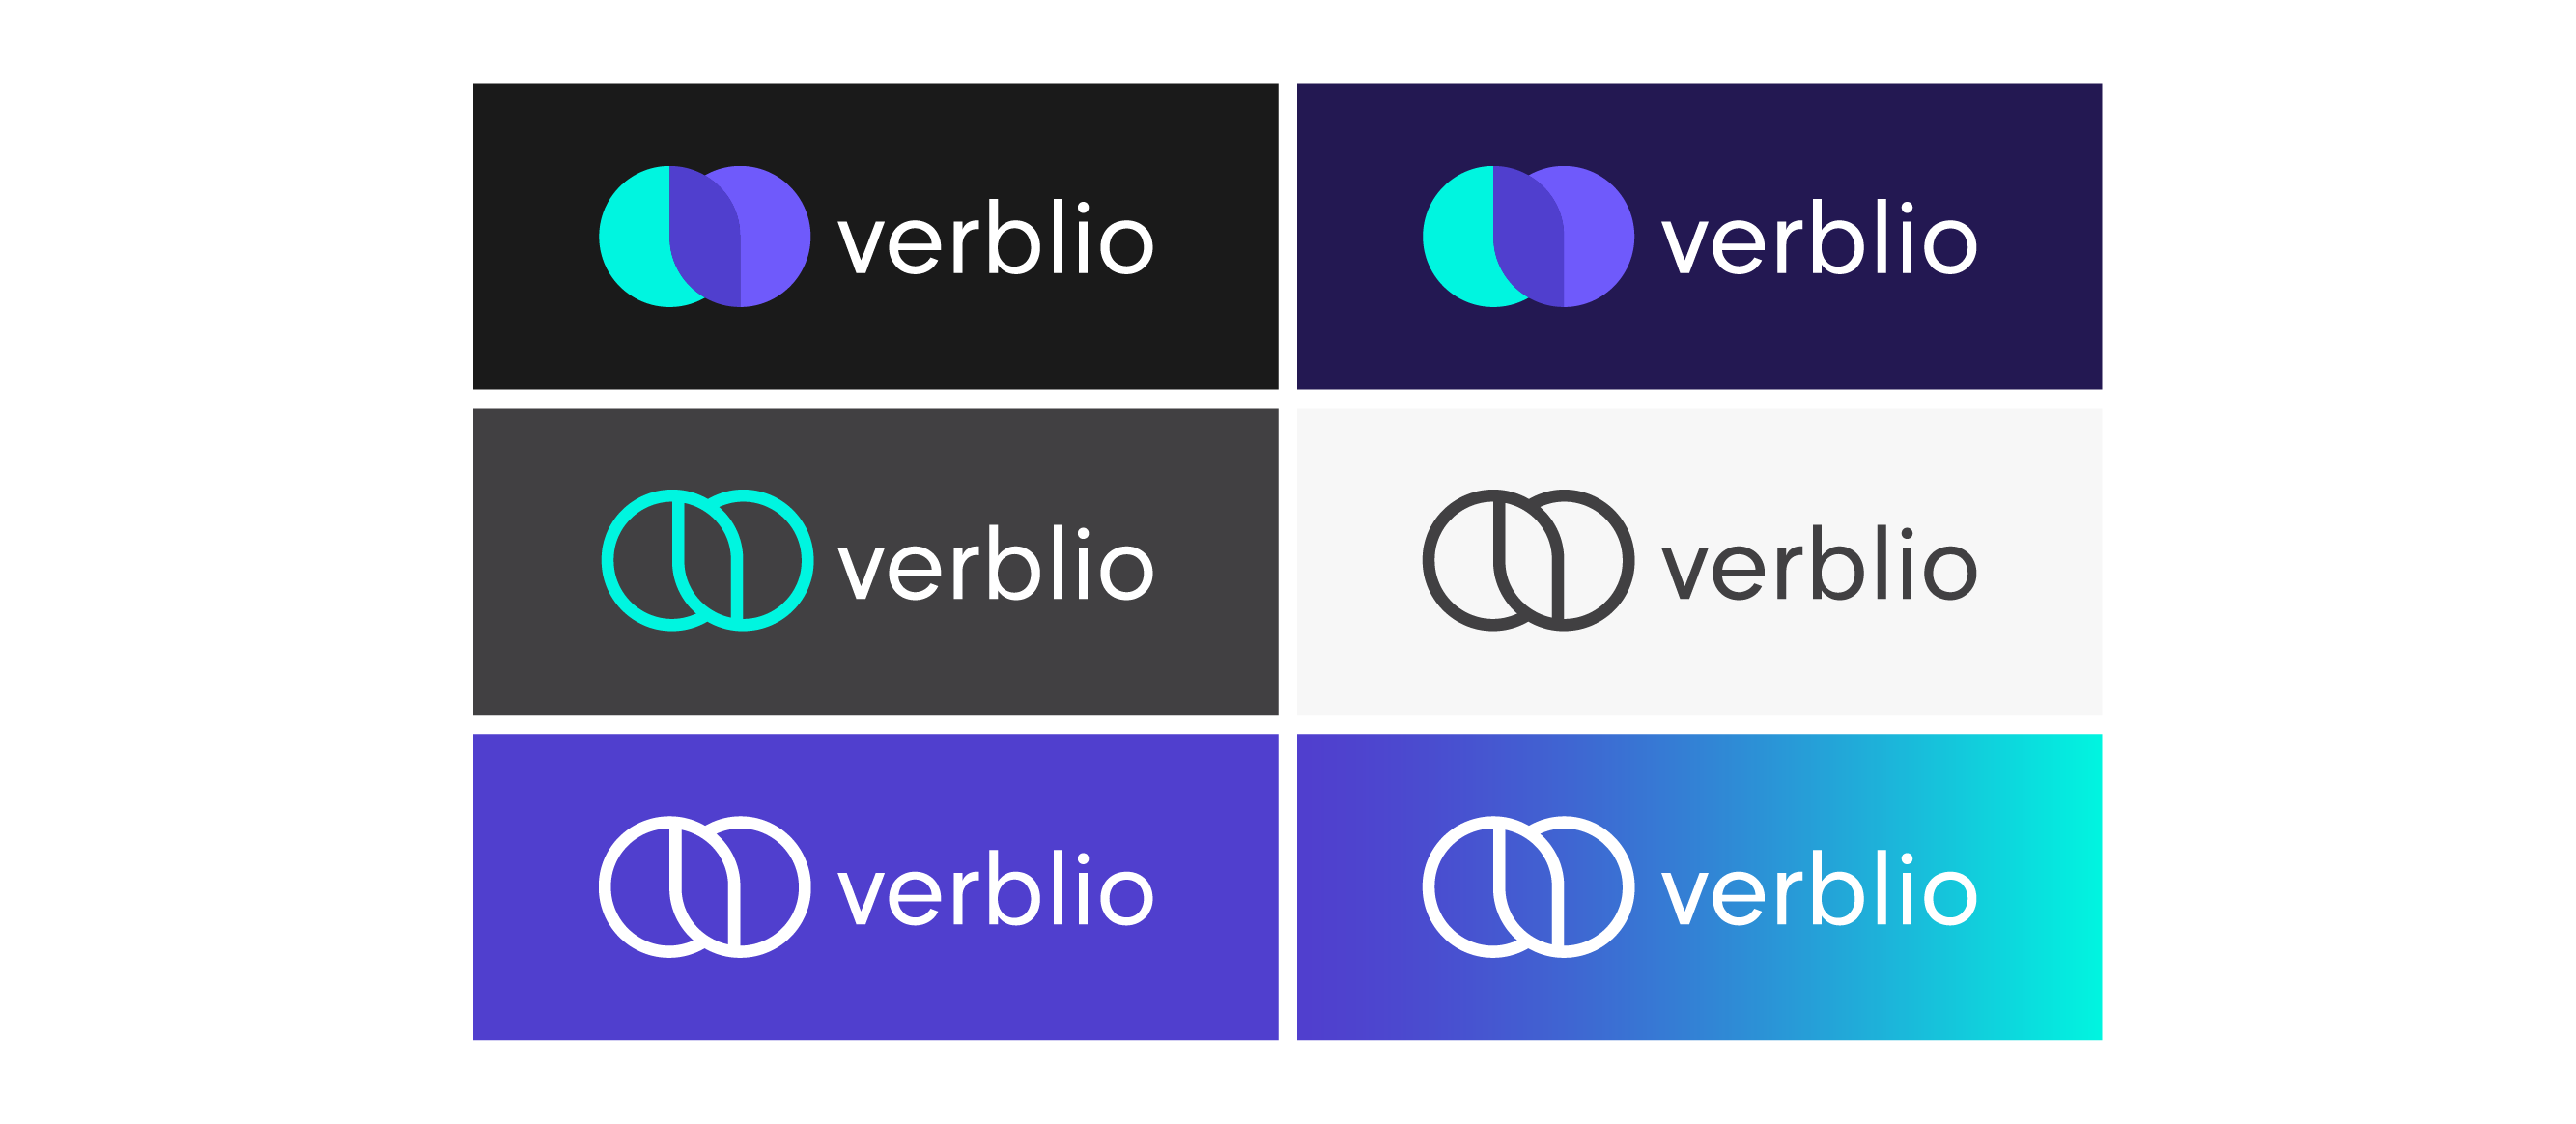 image of verblio 4 color and single color logo versions designed by lulofs